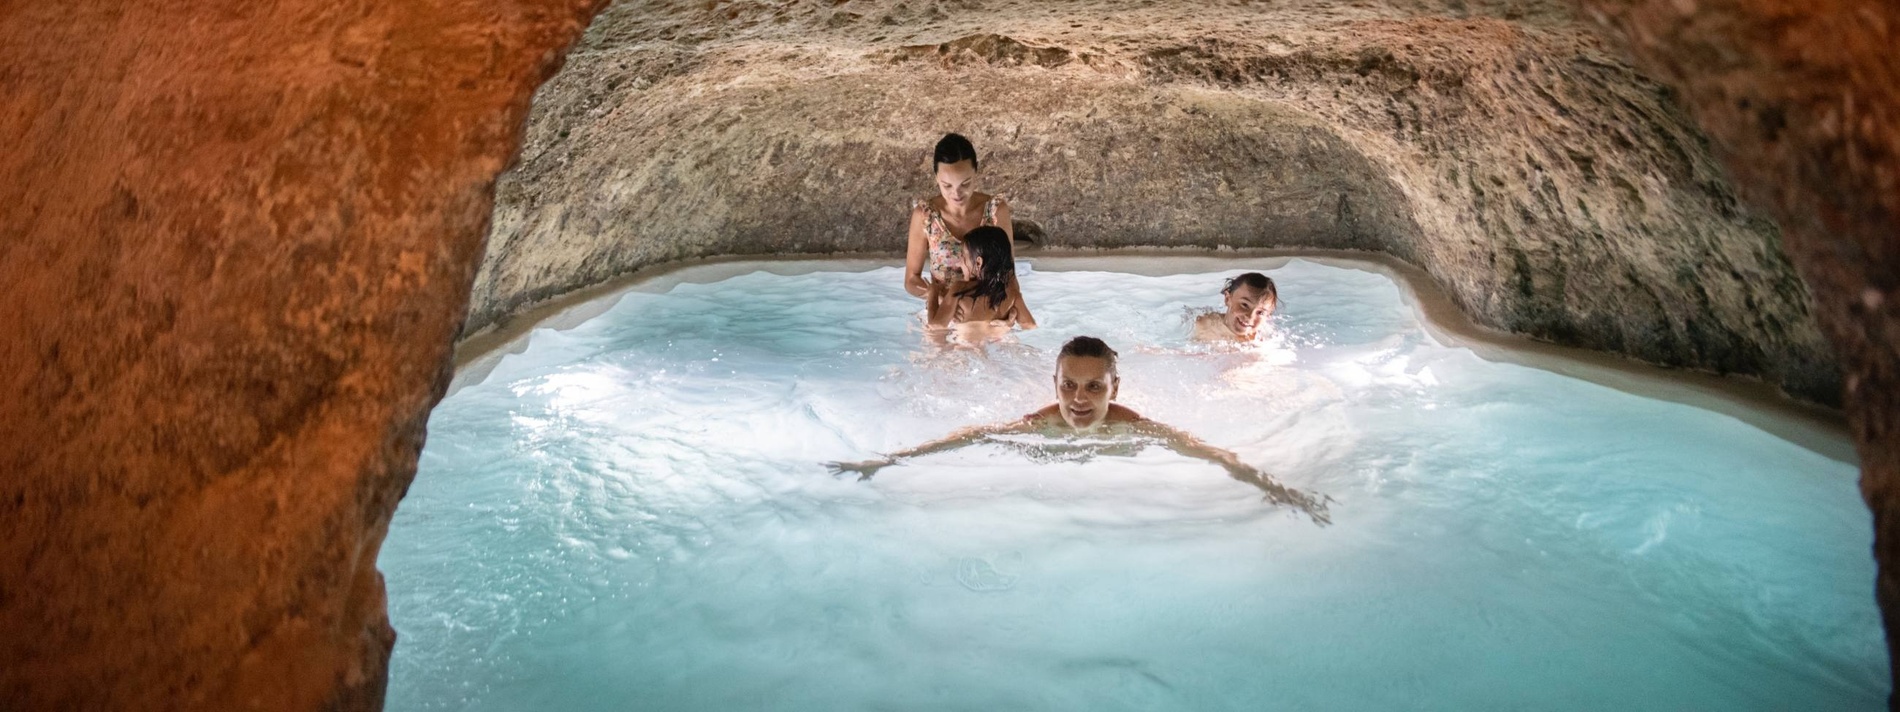 a group of people are swimming in a pool in a cave